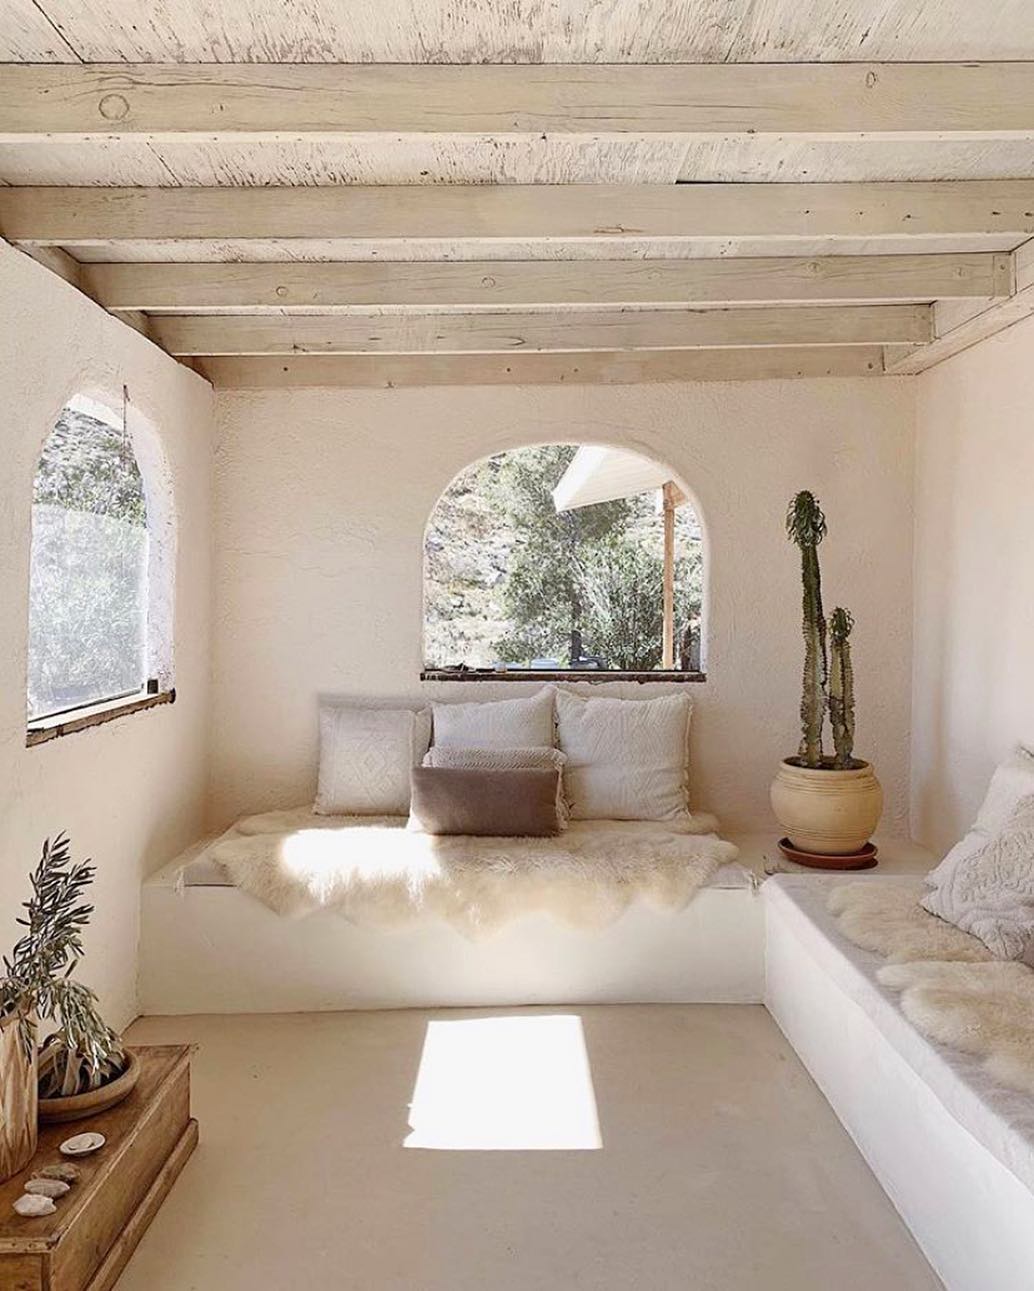 Light colored room with built in bench seating. Photo by Instagram user @vibrantmarket